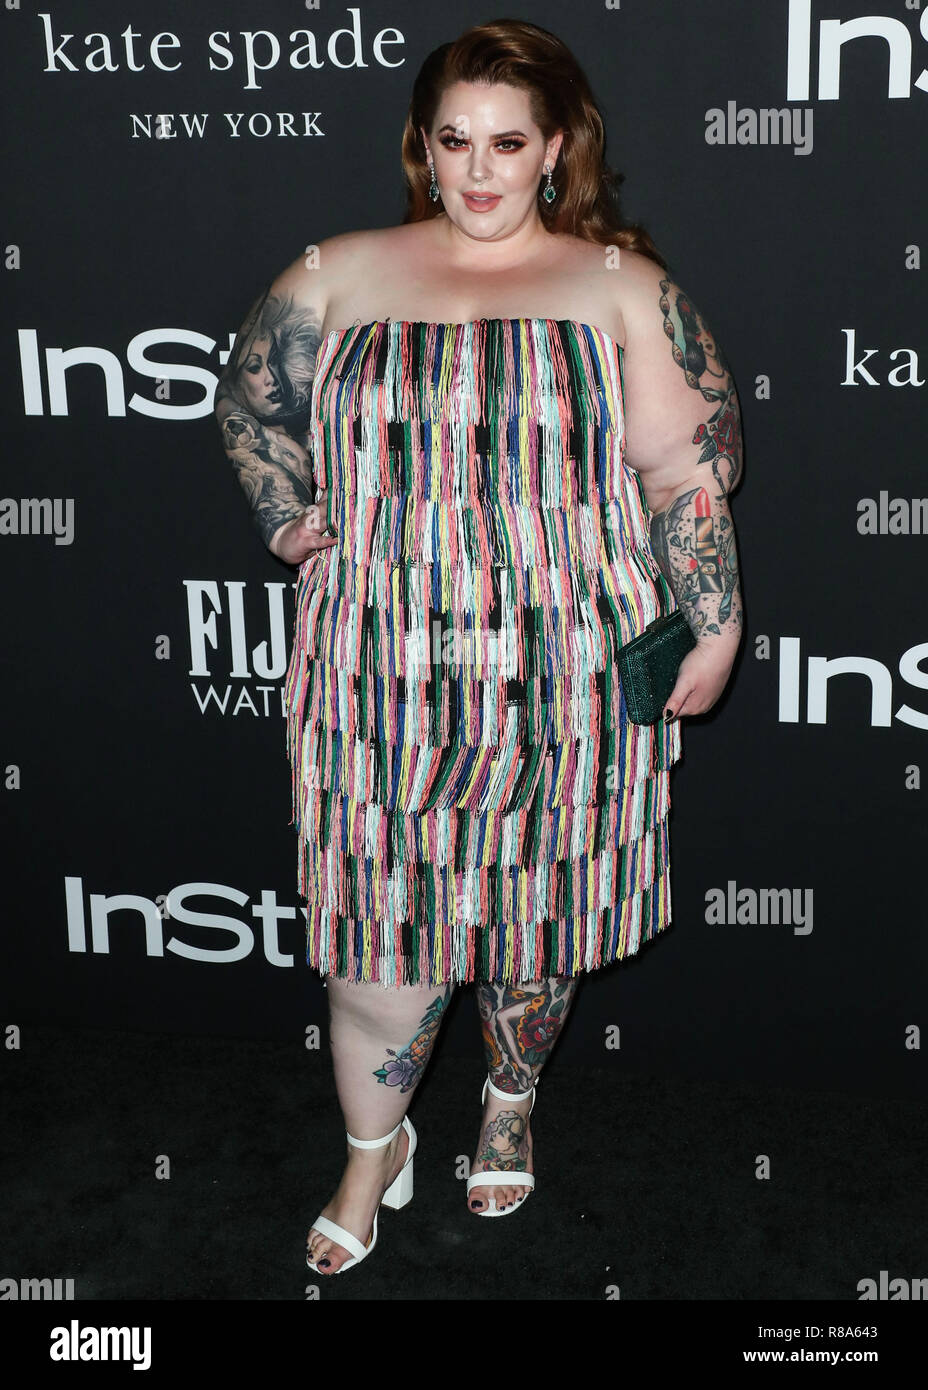 LOS ANGELES, CA, USA - OCTOBER 22: Model Tess Holliday wearing an Eloquii dress, River Island shoes, Kukka Jewelry and carrying a Onna Ehrlich clutch arrives at the InStyle Awards 2018 held at the Getty Center on October 22, 2018 in Los Angeles, California, United States. (Photo by Xavier Collin/Image Press Agency) Stock Photo